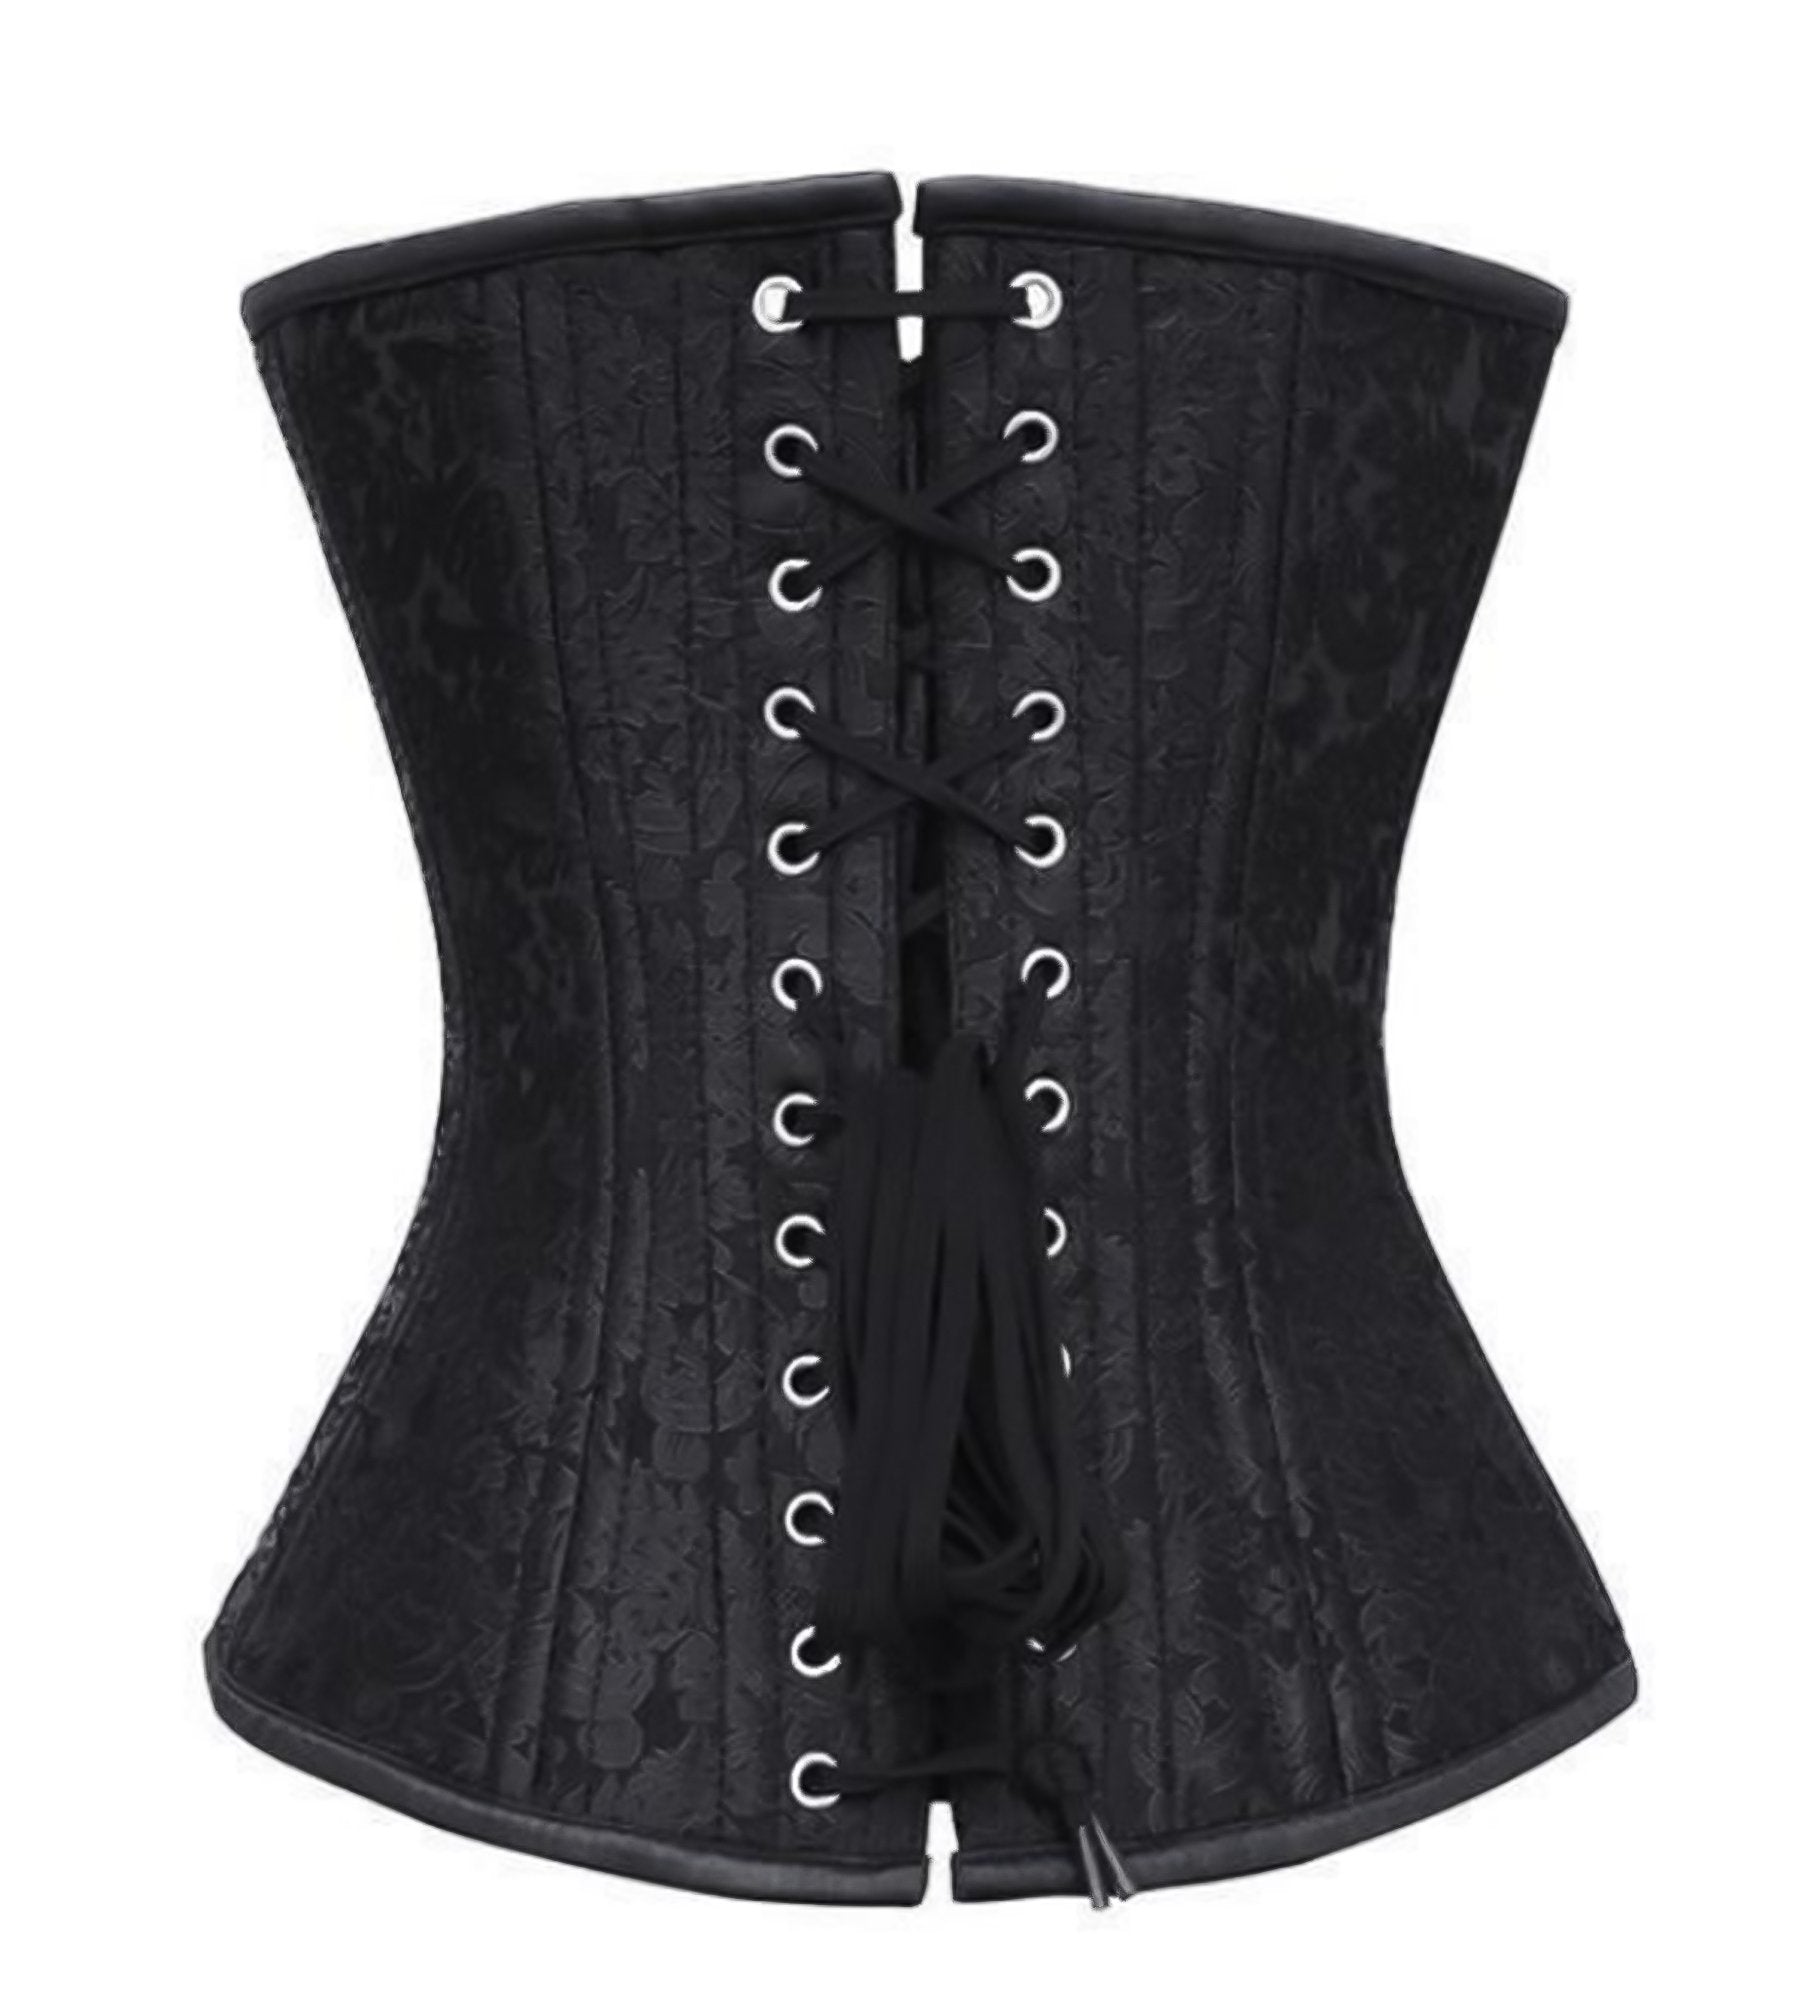 This Time You Can Choose Your Own Waist Training Black Corset